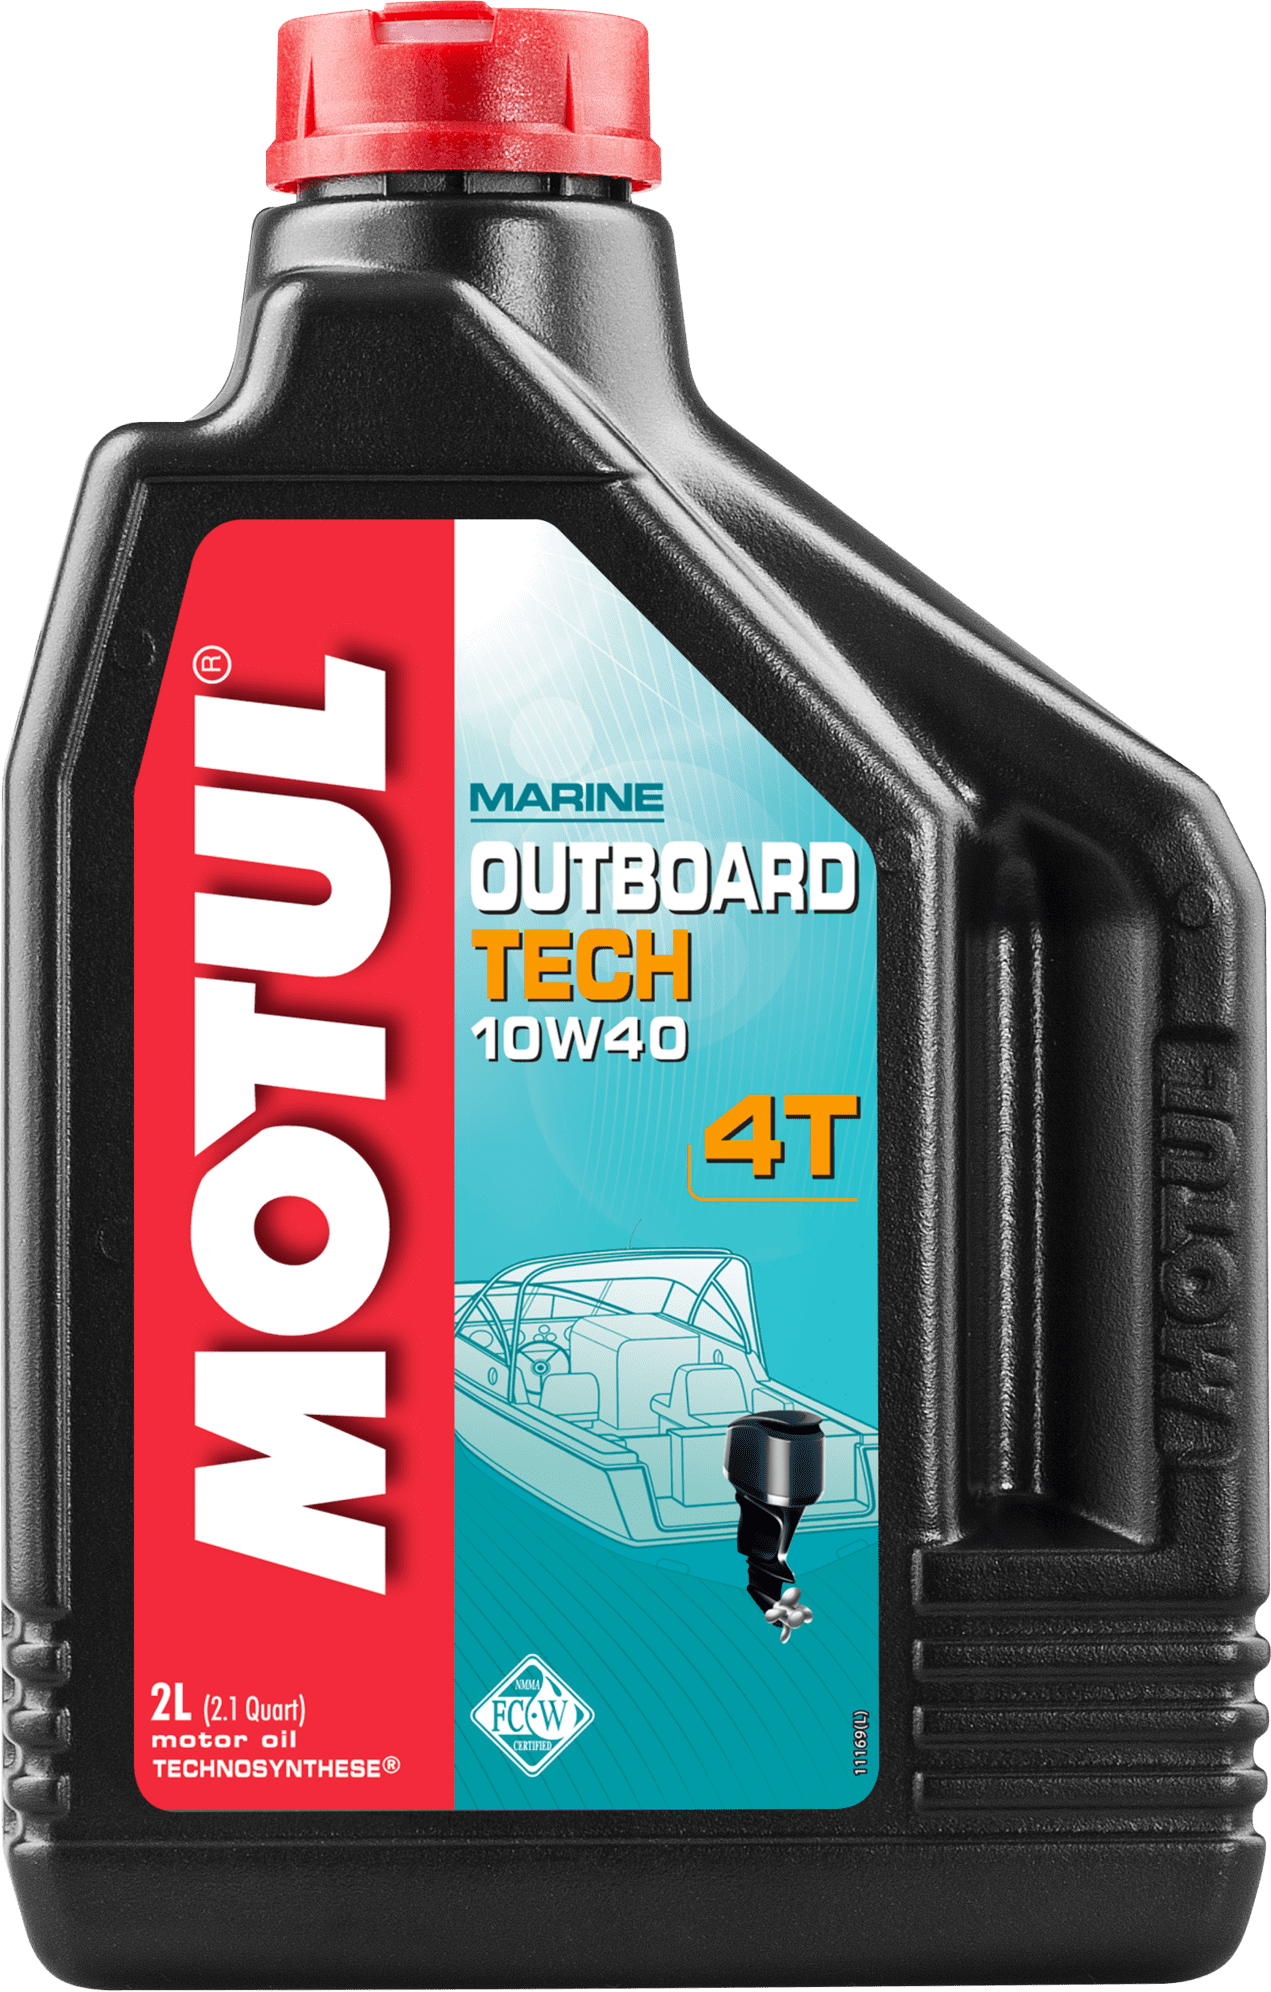 106368-2 Technosynthese® lubricant for 4-Stroke Outboard or sterndrive engines calling for NMMA FC-W lubricants.